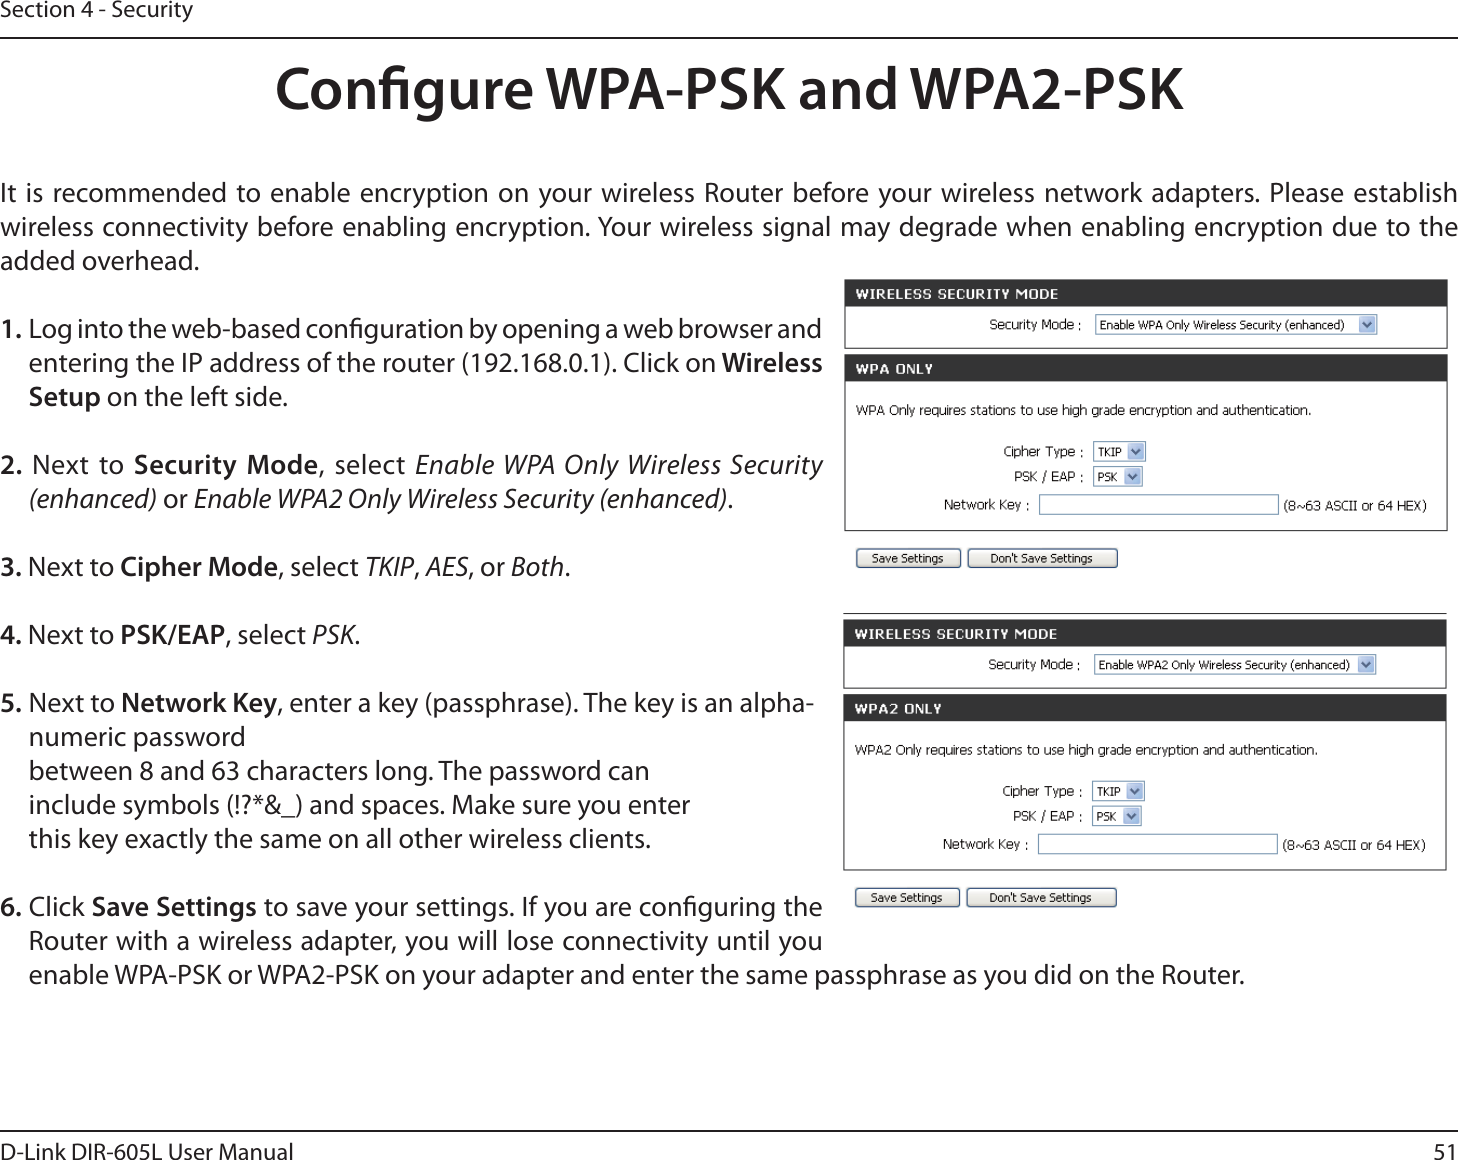 51D-Link DIR-605L User ManualSection 4 - SecurityCongure WPA-PSK and WPA2-PSKIt is recommended to enable encryption on your wireless Router before your wireless network adapters. Please establish wireless connectivity before enabling encryption. Your wireless signal may degrade when enabling encryption due to the added overhead.1. Log into the web-based conguration by opening a web browser and entering the IP address of the router (192.168.0.1). Click on Wireless Setup on the left side.2. Next to Security Mode, select Enable WPA Only Wireless Security (enhanced) or Enable WPA2 Only Wireless Security (enhanced).3. Next to Cipher Mode, select TKIP, AES, or Both.4. Next to PSK/EAP, select PSK.5. Next to Network Key, enter a key (passphrase). The key is an alpha-numeric password between 8 and 63 characters long. The password can include symbols (!?*&amp;_) and spaces. Make sure you enter this key exactly the same on all other wireless clients.6. Click Save Settings to save your settings. If you are conguring the Router with a wireless adapter, you will lose connectivity until you enable WPA-PSK or WPA2-PSK on your adapter and enter the same passphrase as you did on the Router.